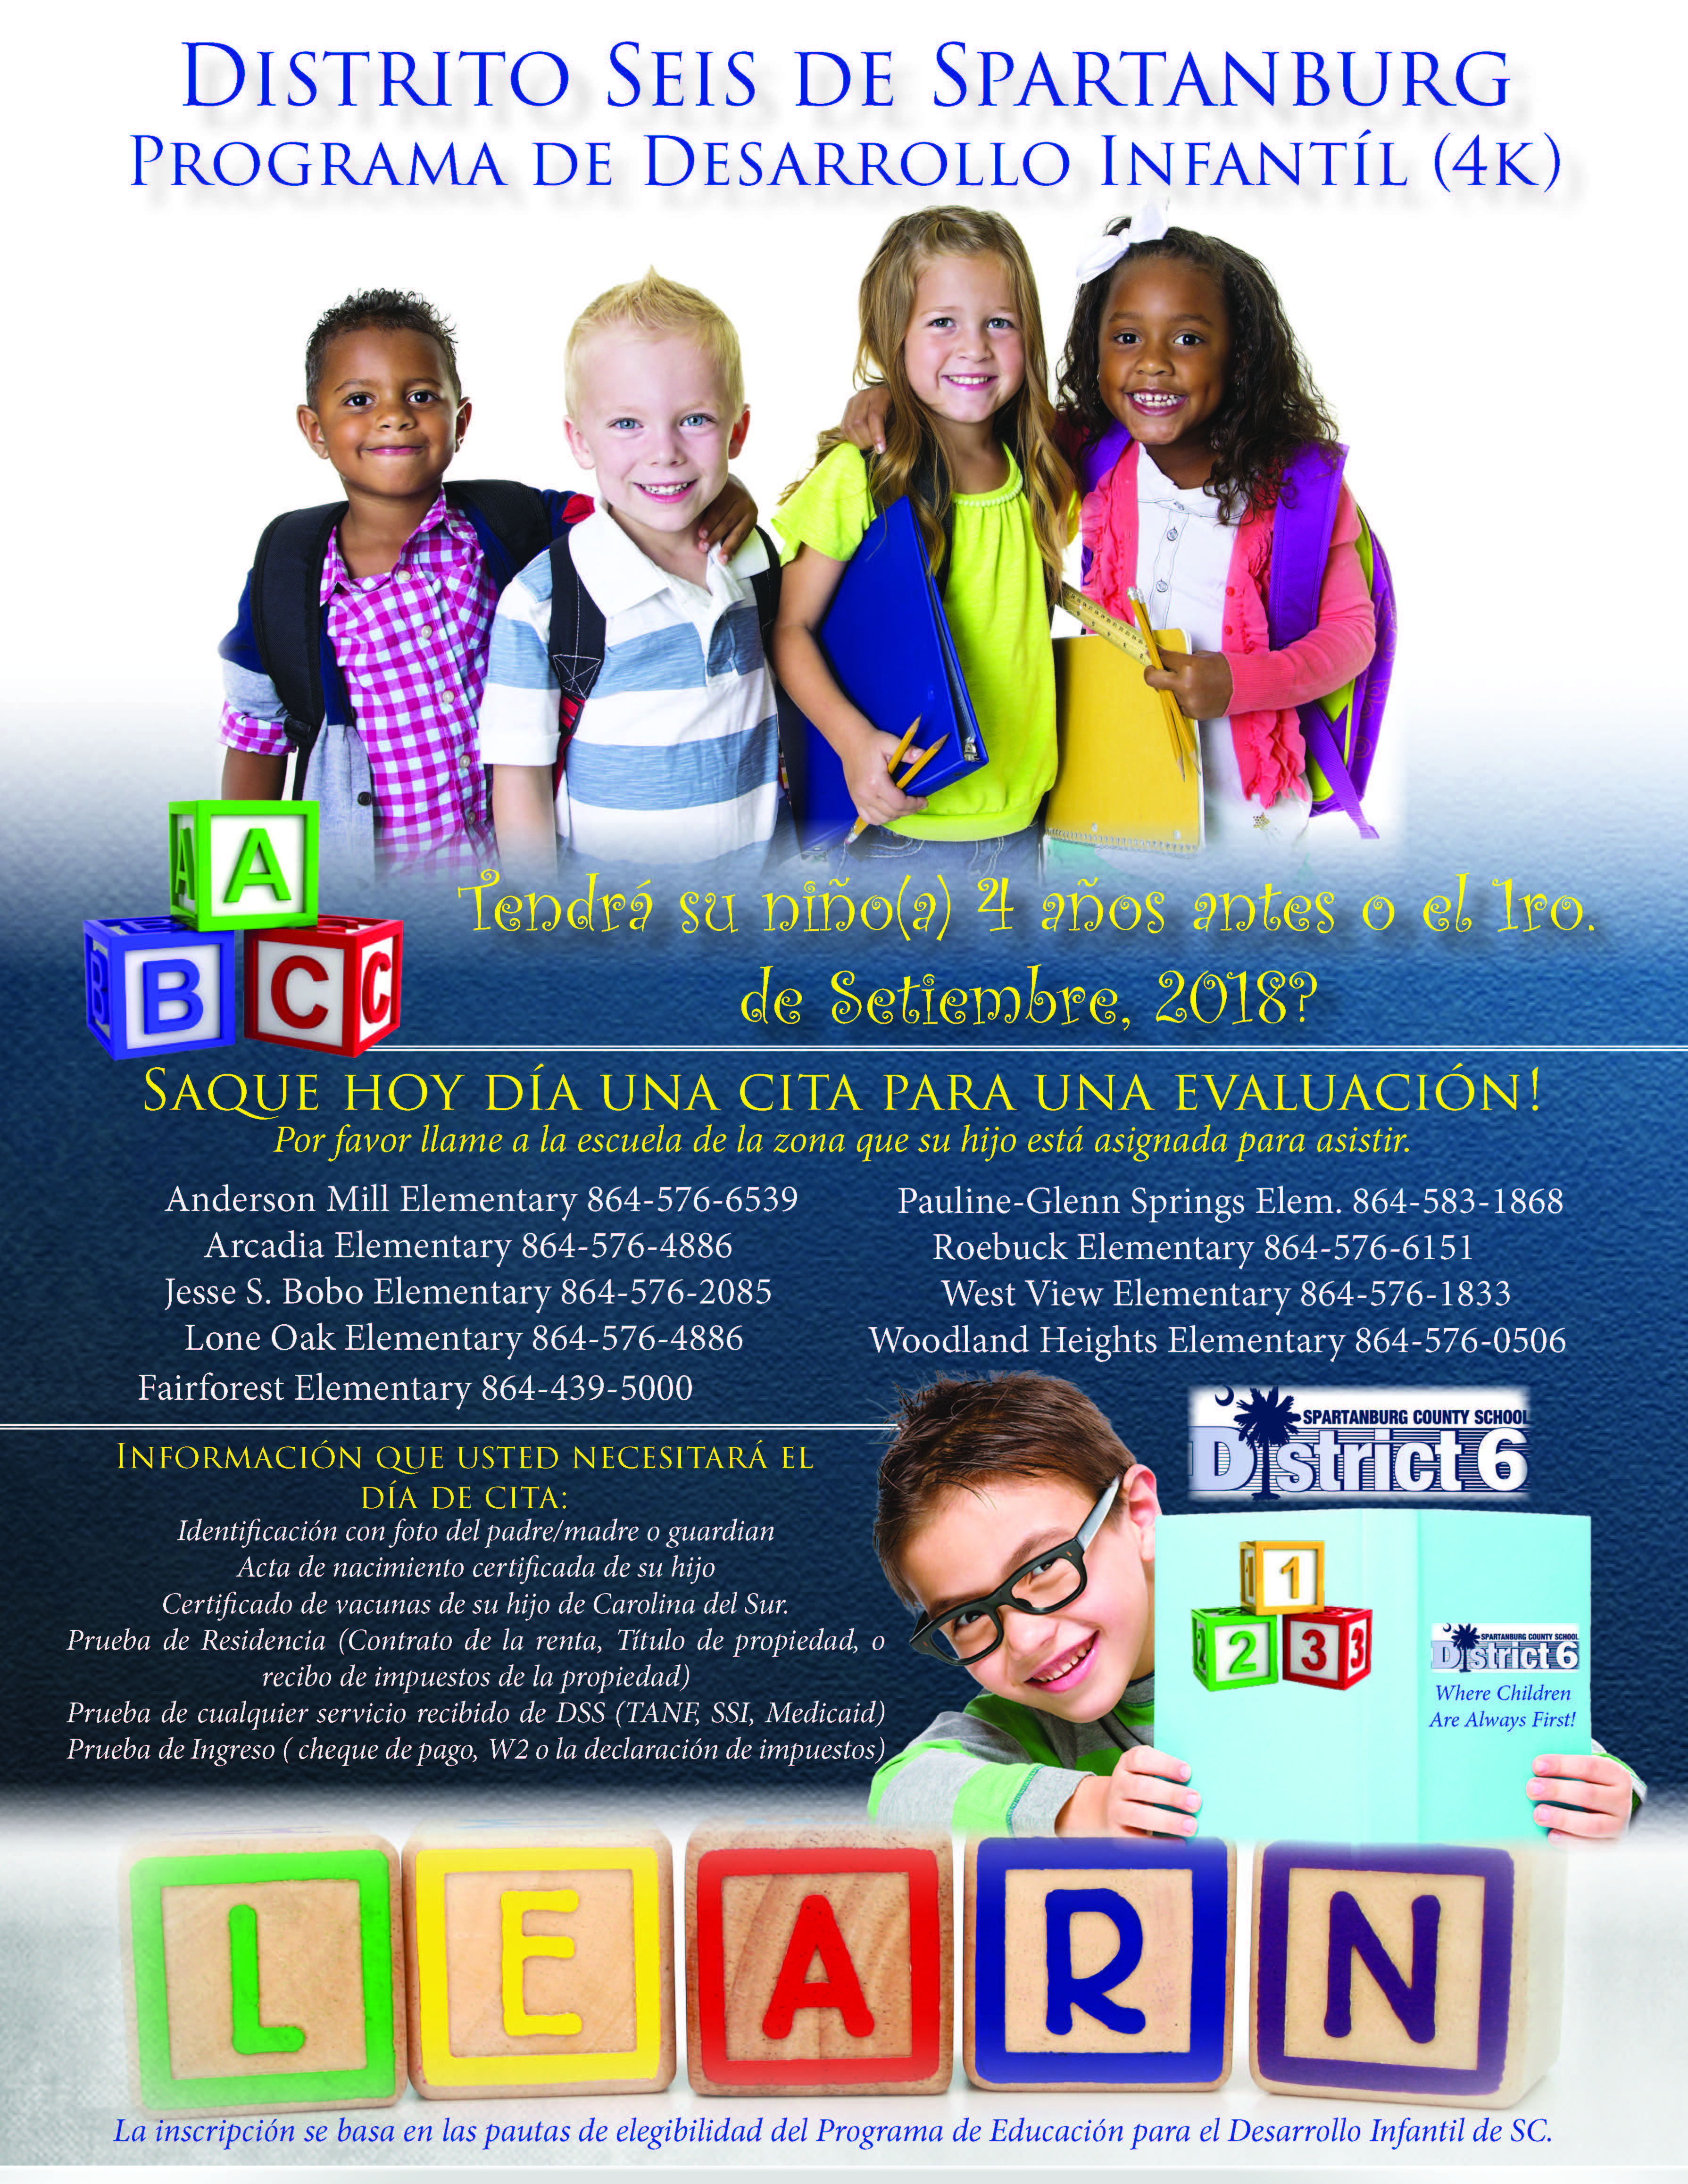 Flyer with pictures of kids. Flyer states will your child be four years old before September 1, 2018. If so then call the school the child is zoned for and schedule a 4k screening.  This is the Spanish version of the same flyer. 